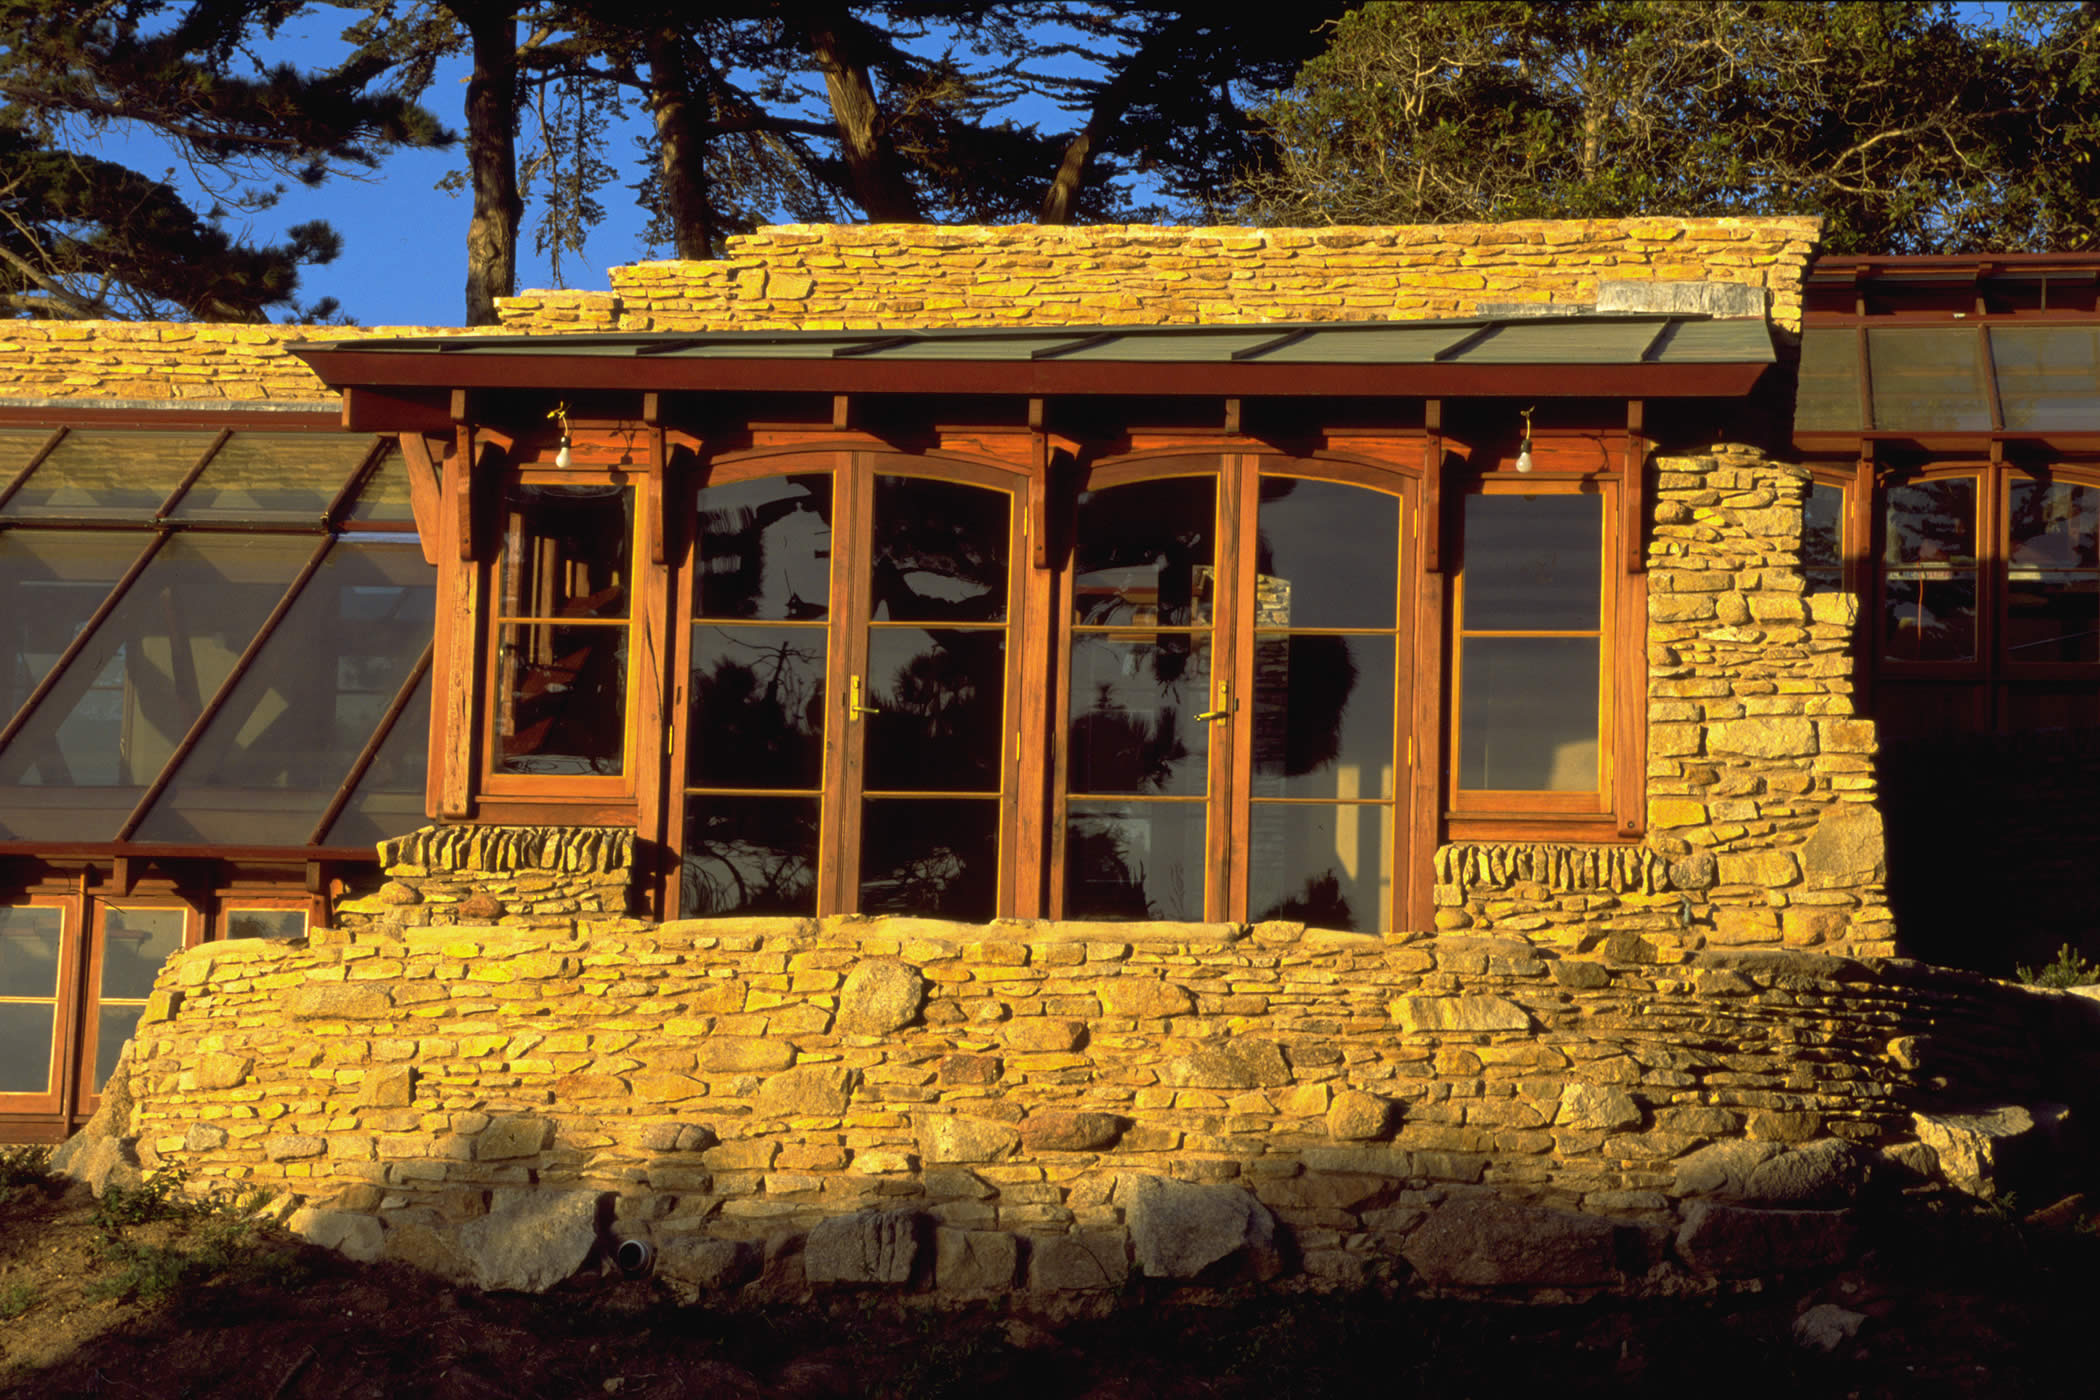 The James House Greenhouse, Carmel Highlands, California: Greenhouse detail of stonework and mixed eucalyptus hardwood recycled timber doors which interpret Charles Greene’s James House main house Mission Revival Style. Photo by James Morrison.